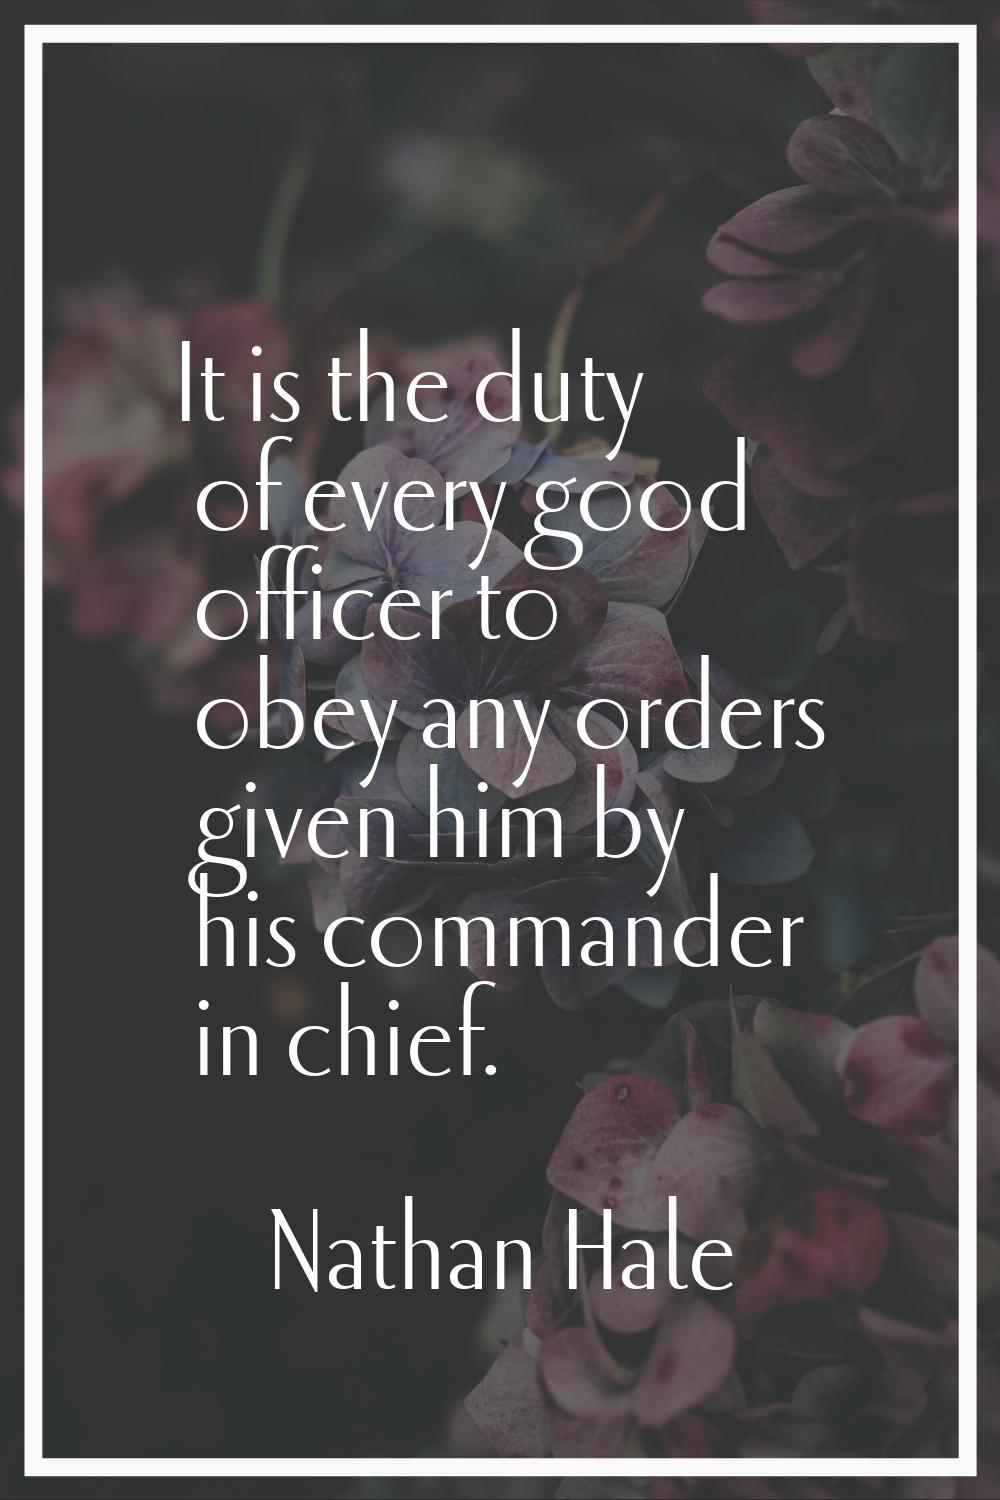 It is the duty of every good officer to obey any orders given him by his commander in chief.